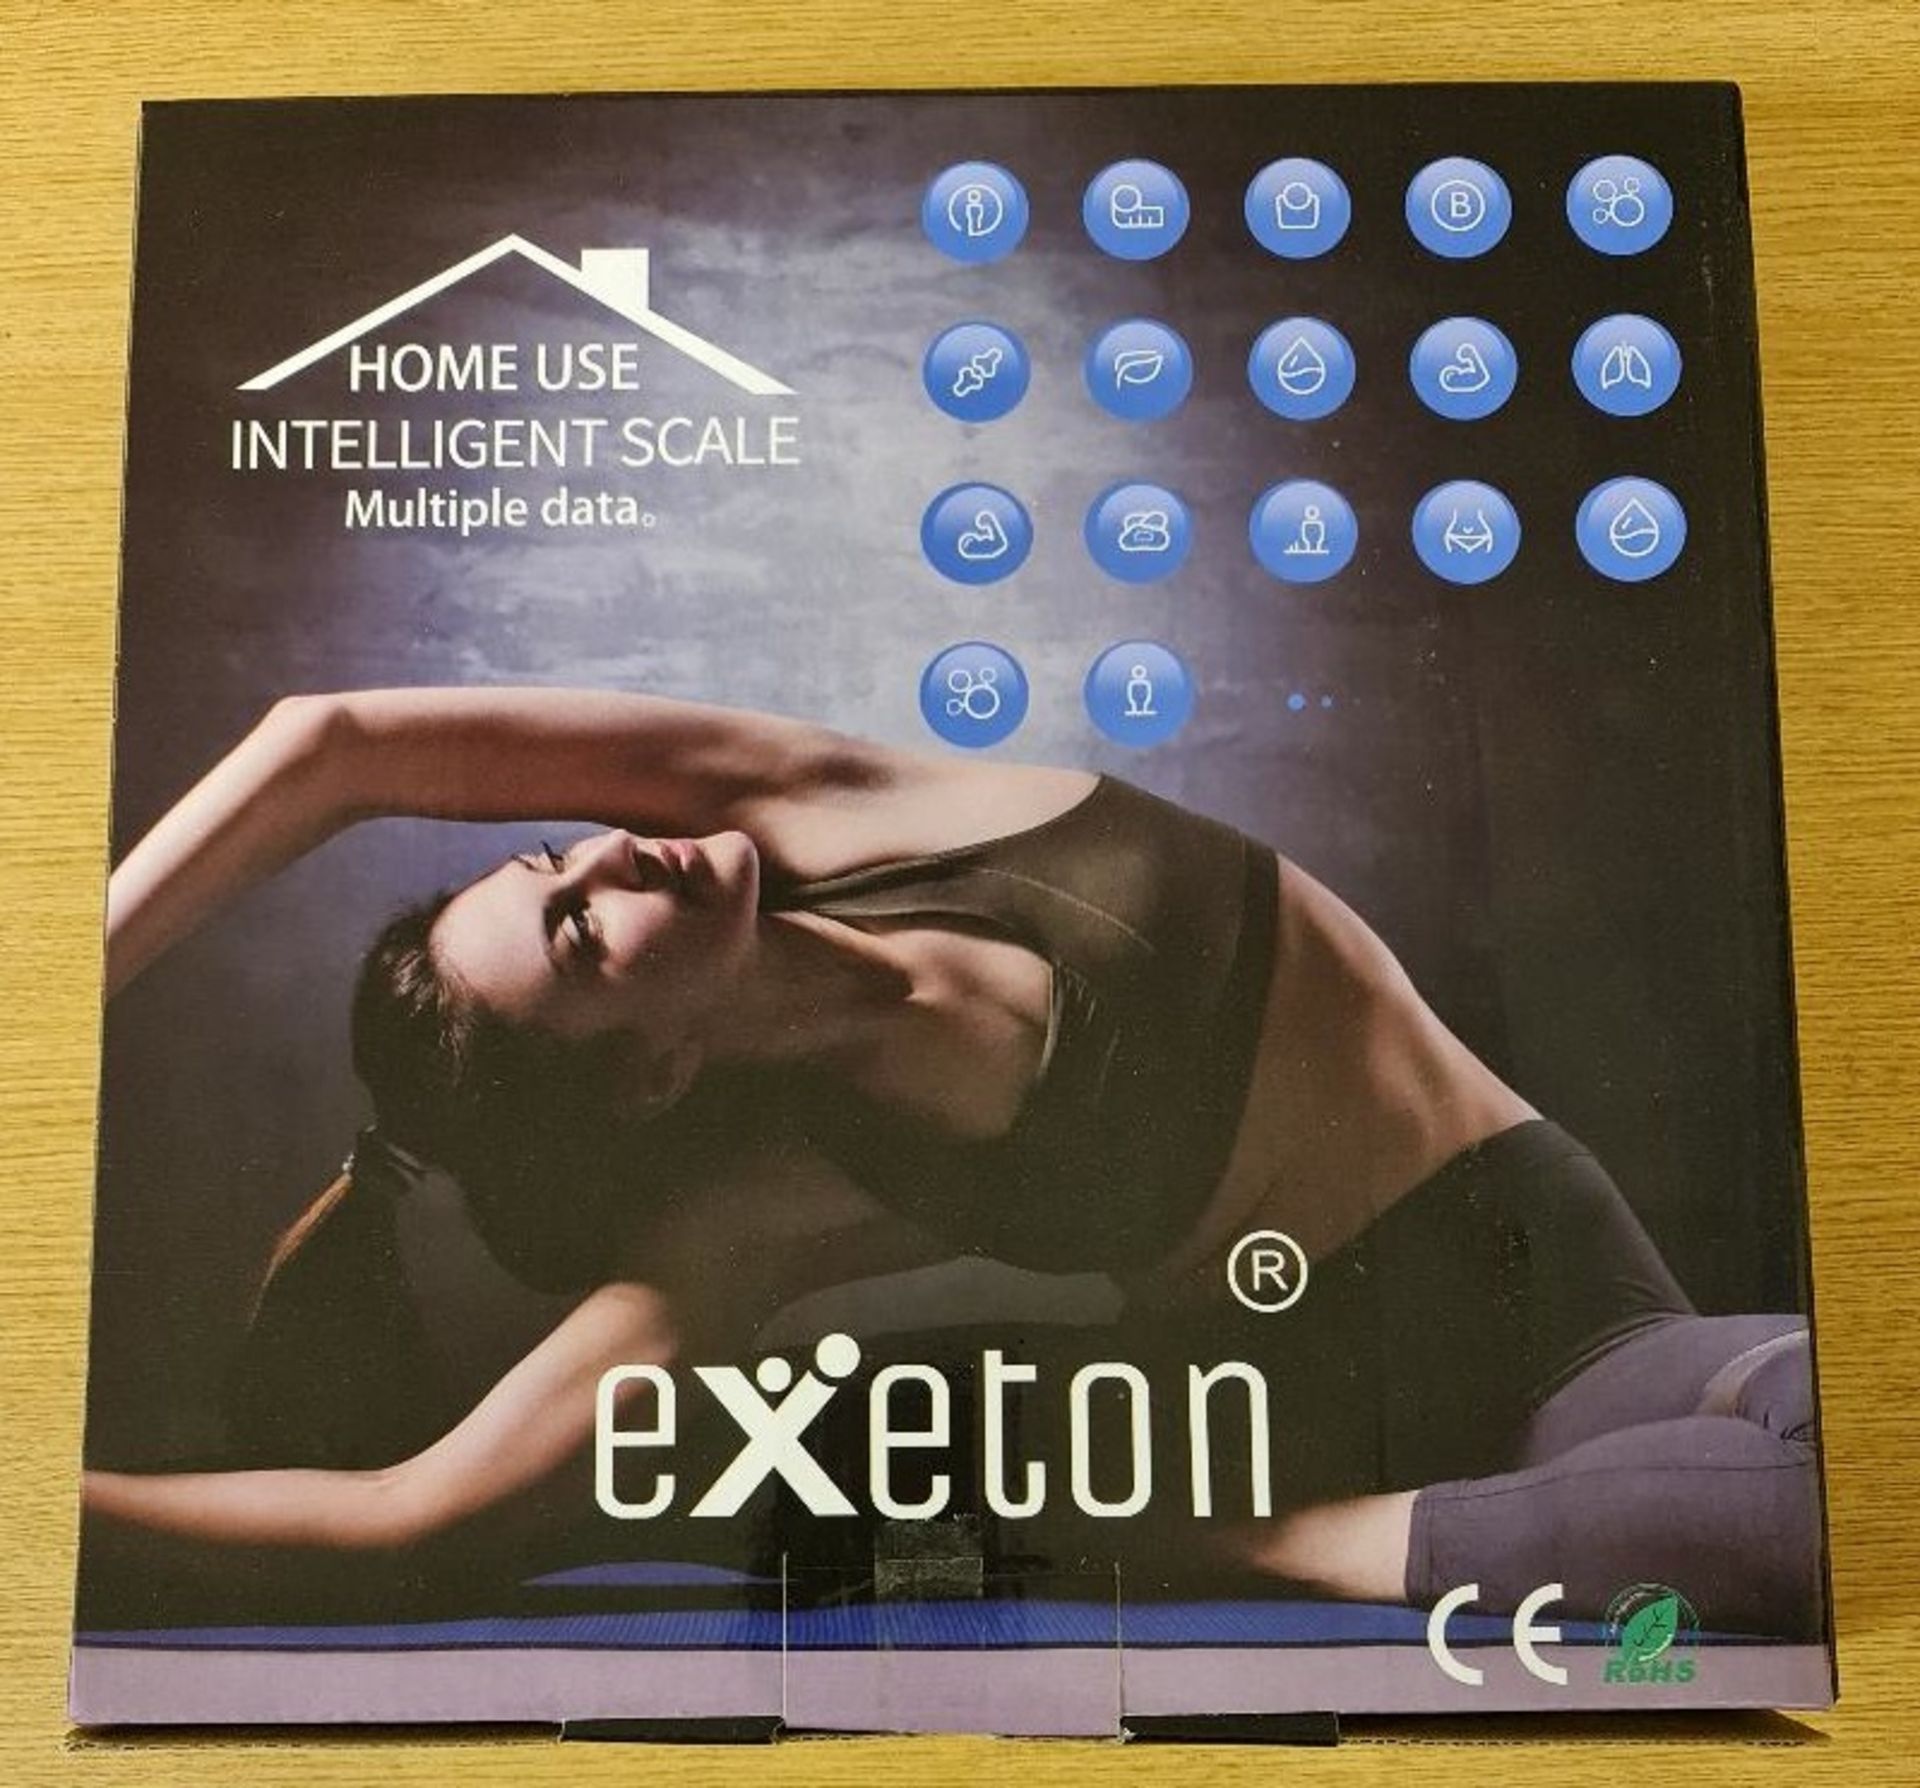 Exeton, Body Weighing Scale, Bluetooth Smart, Body Fat, BMI, 180Kg/396Lbs, USB Rechargeable - Image 7 of 7